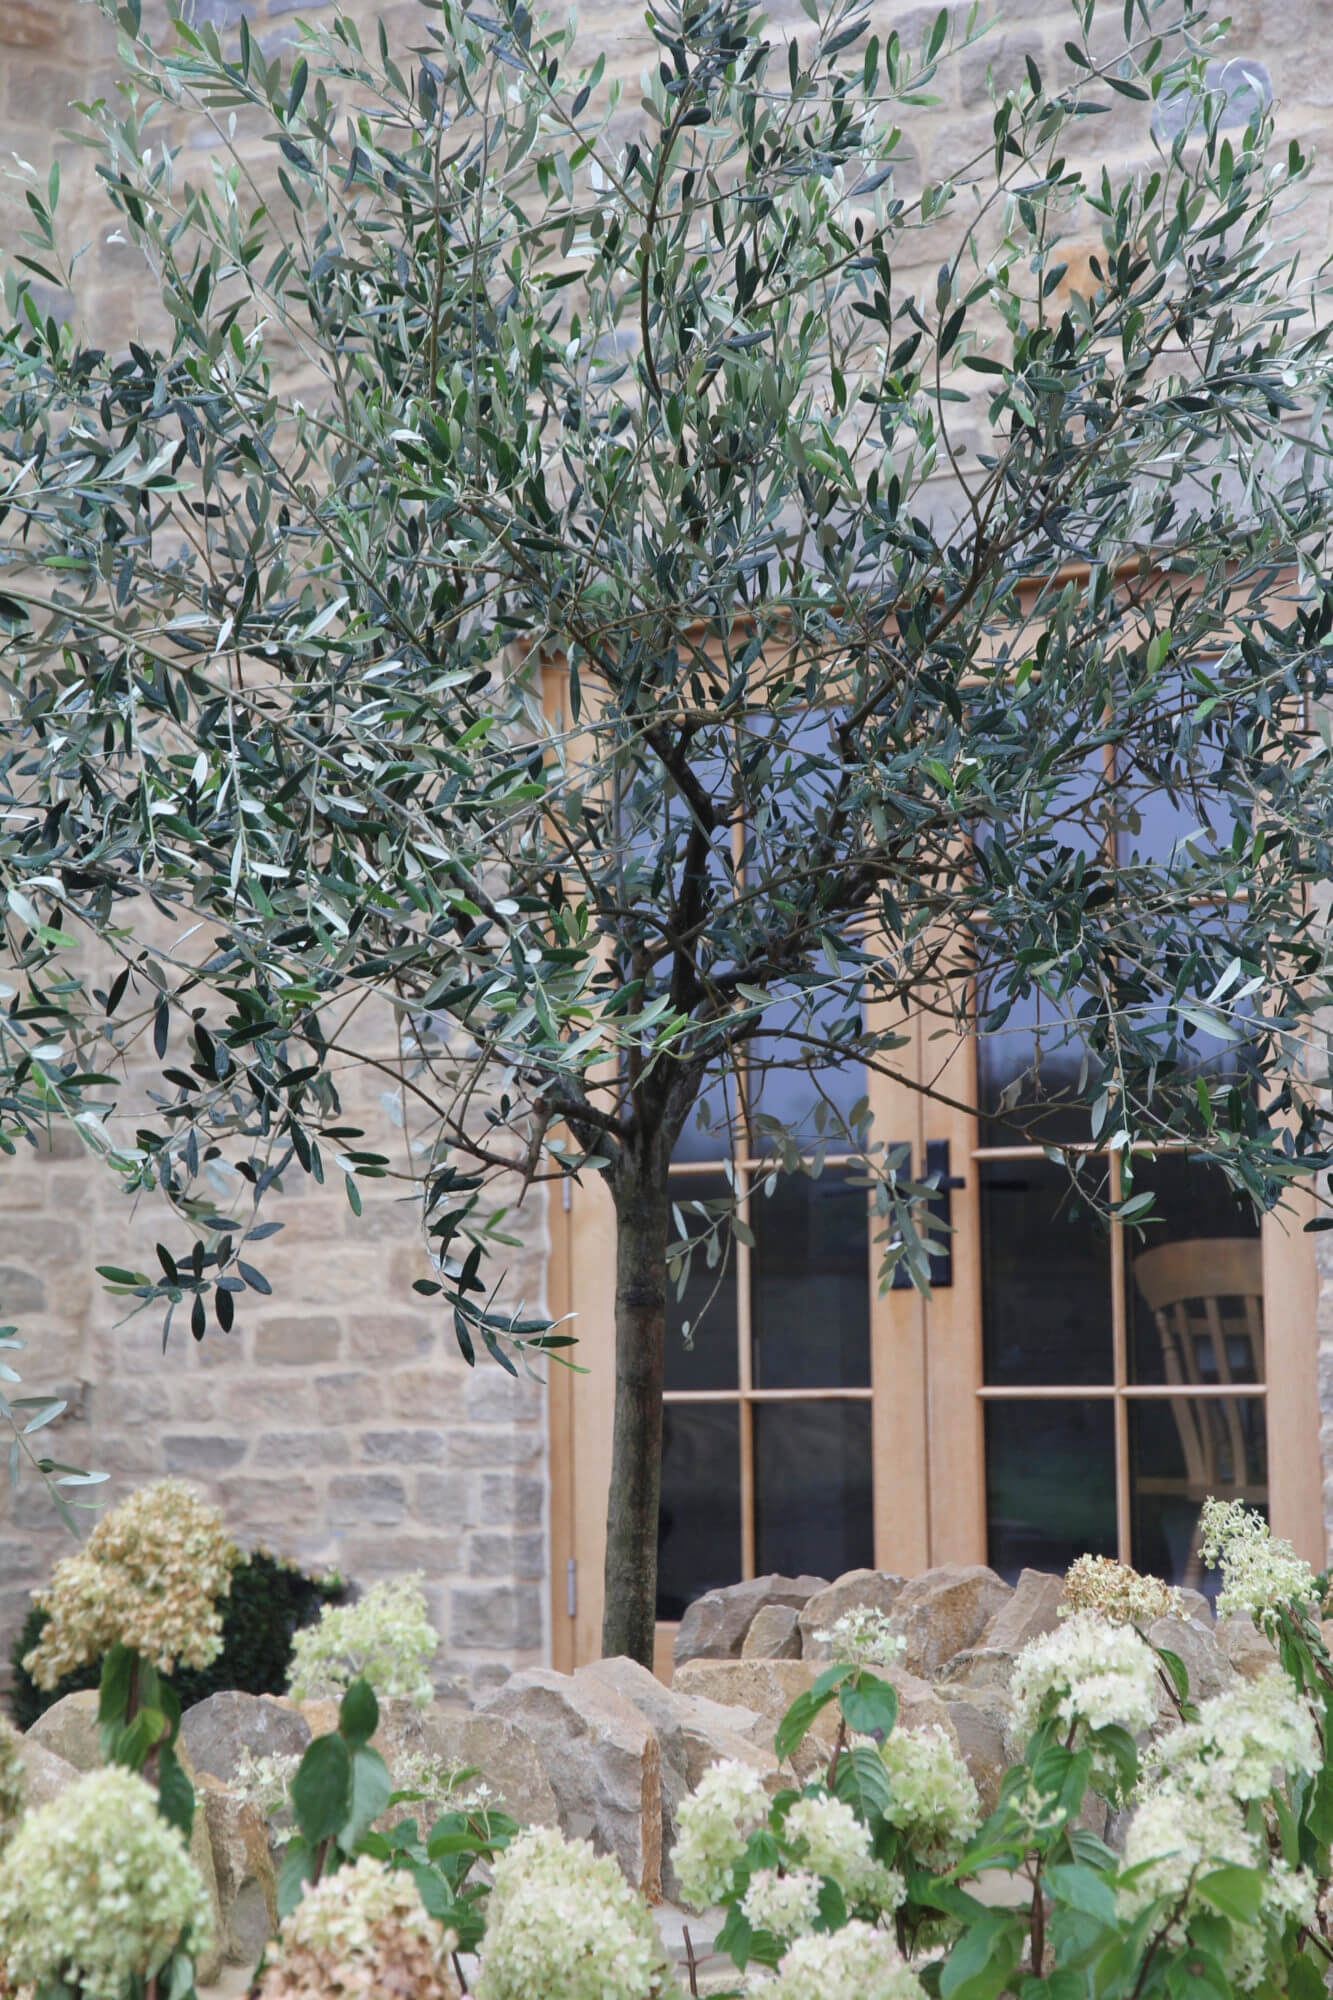 Olive tree against stone house with hydrangeas growing under